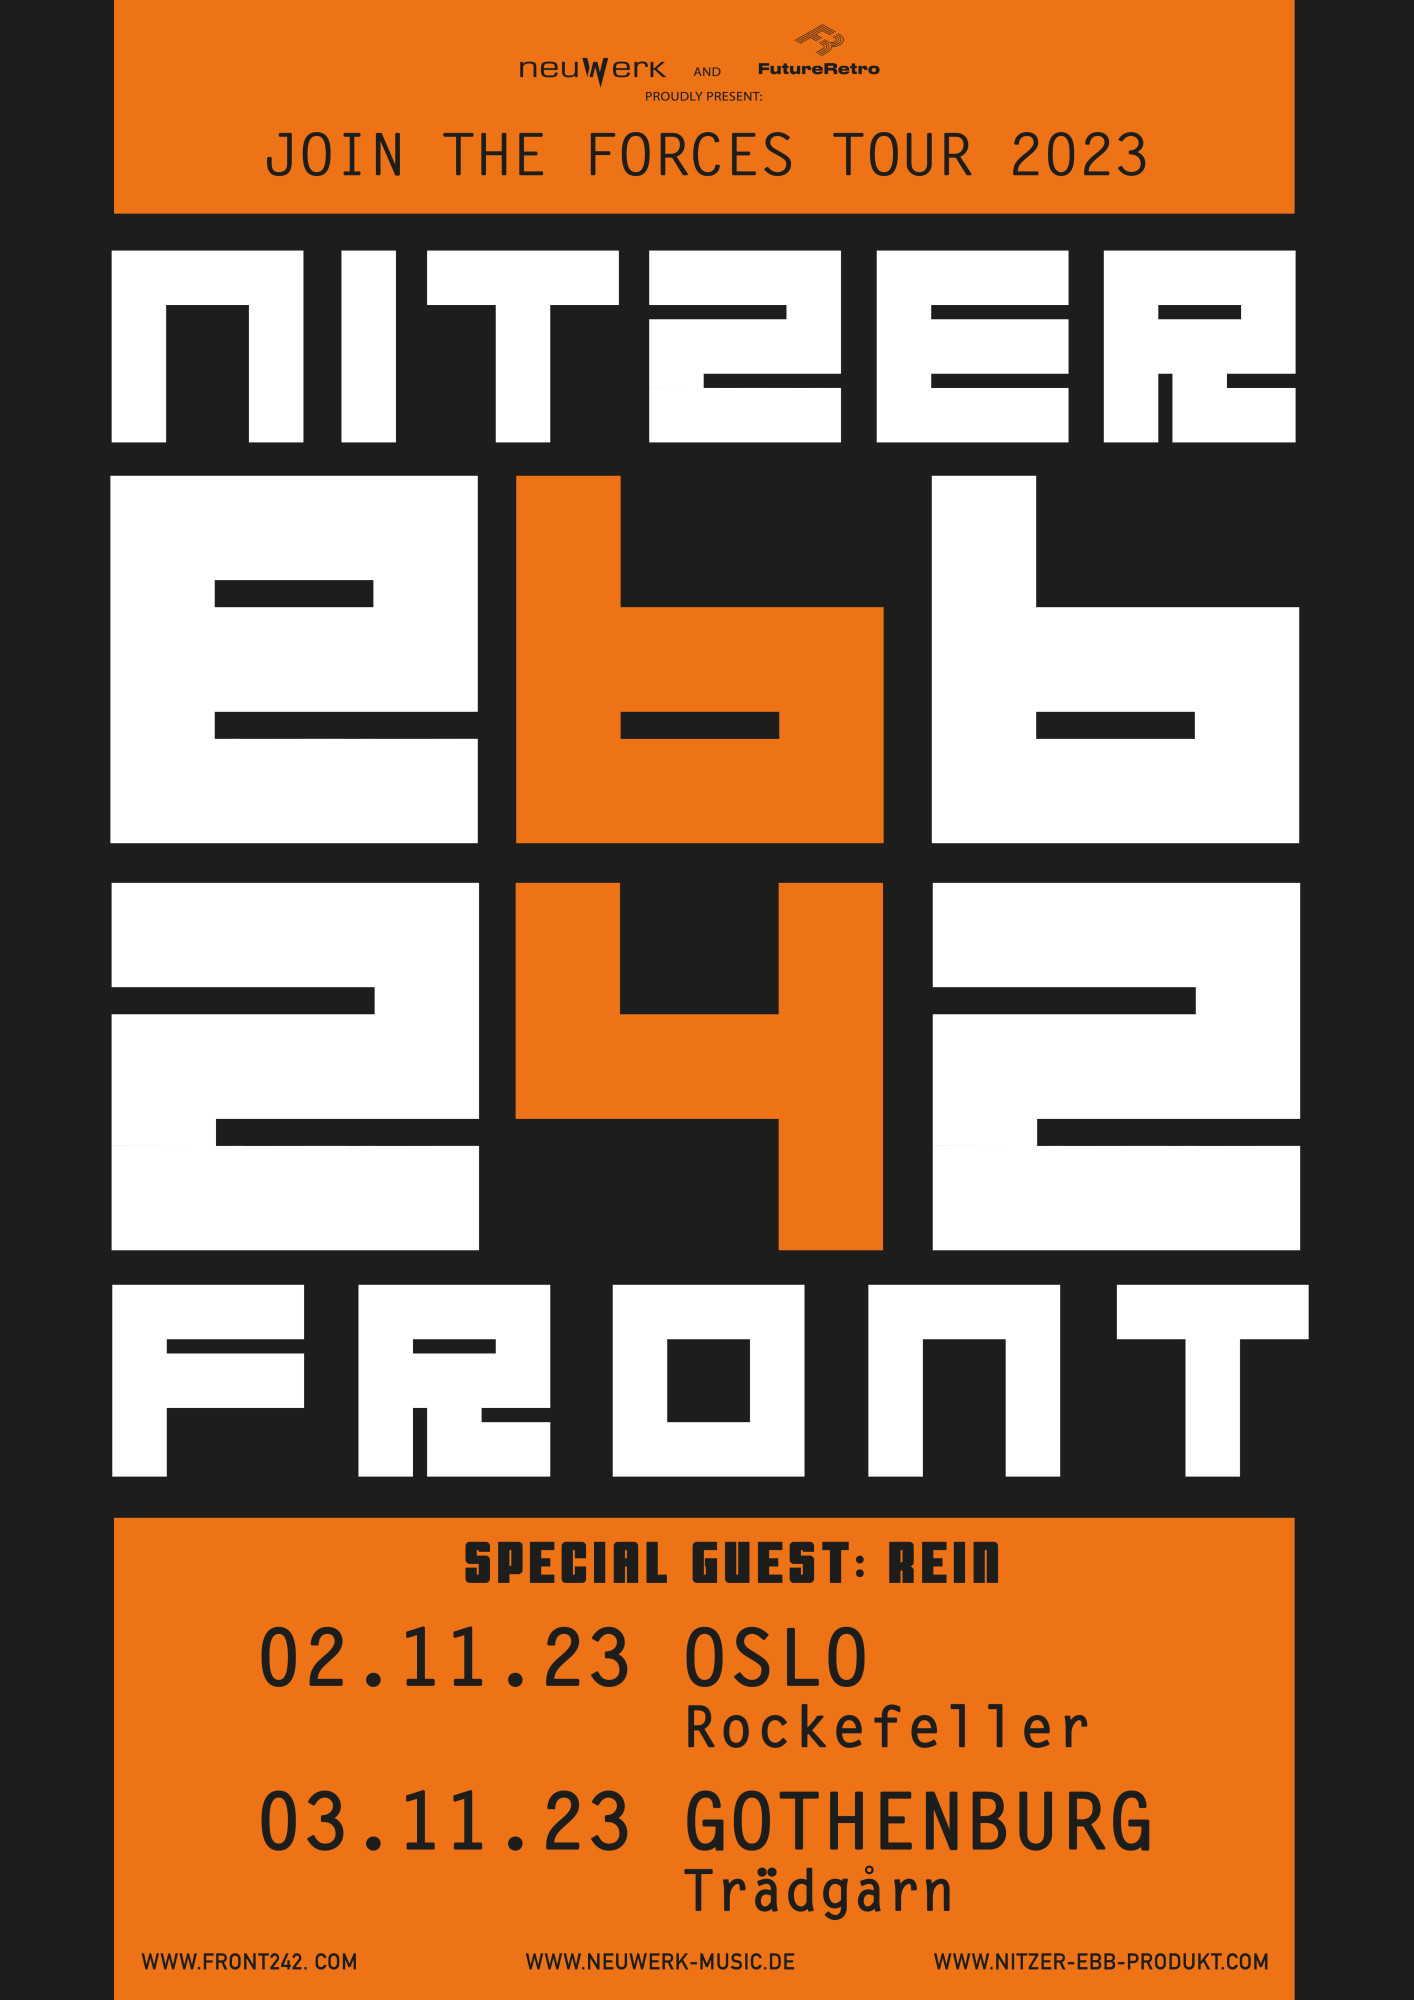 FRONT 242 + NITZER EBB "Join The Forces Tour November 2023"